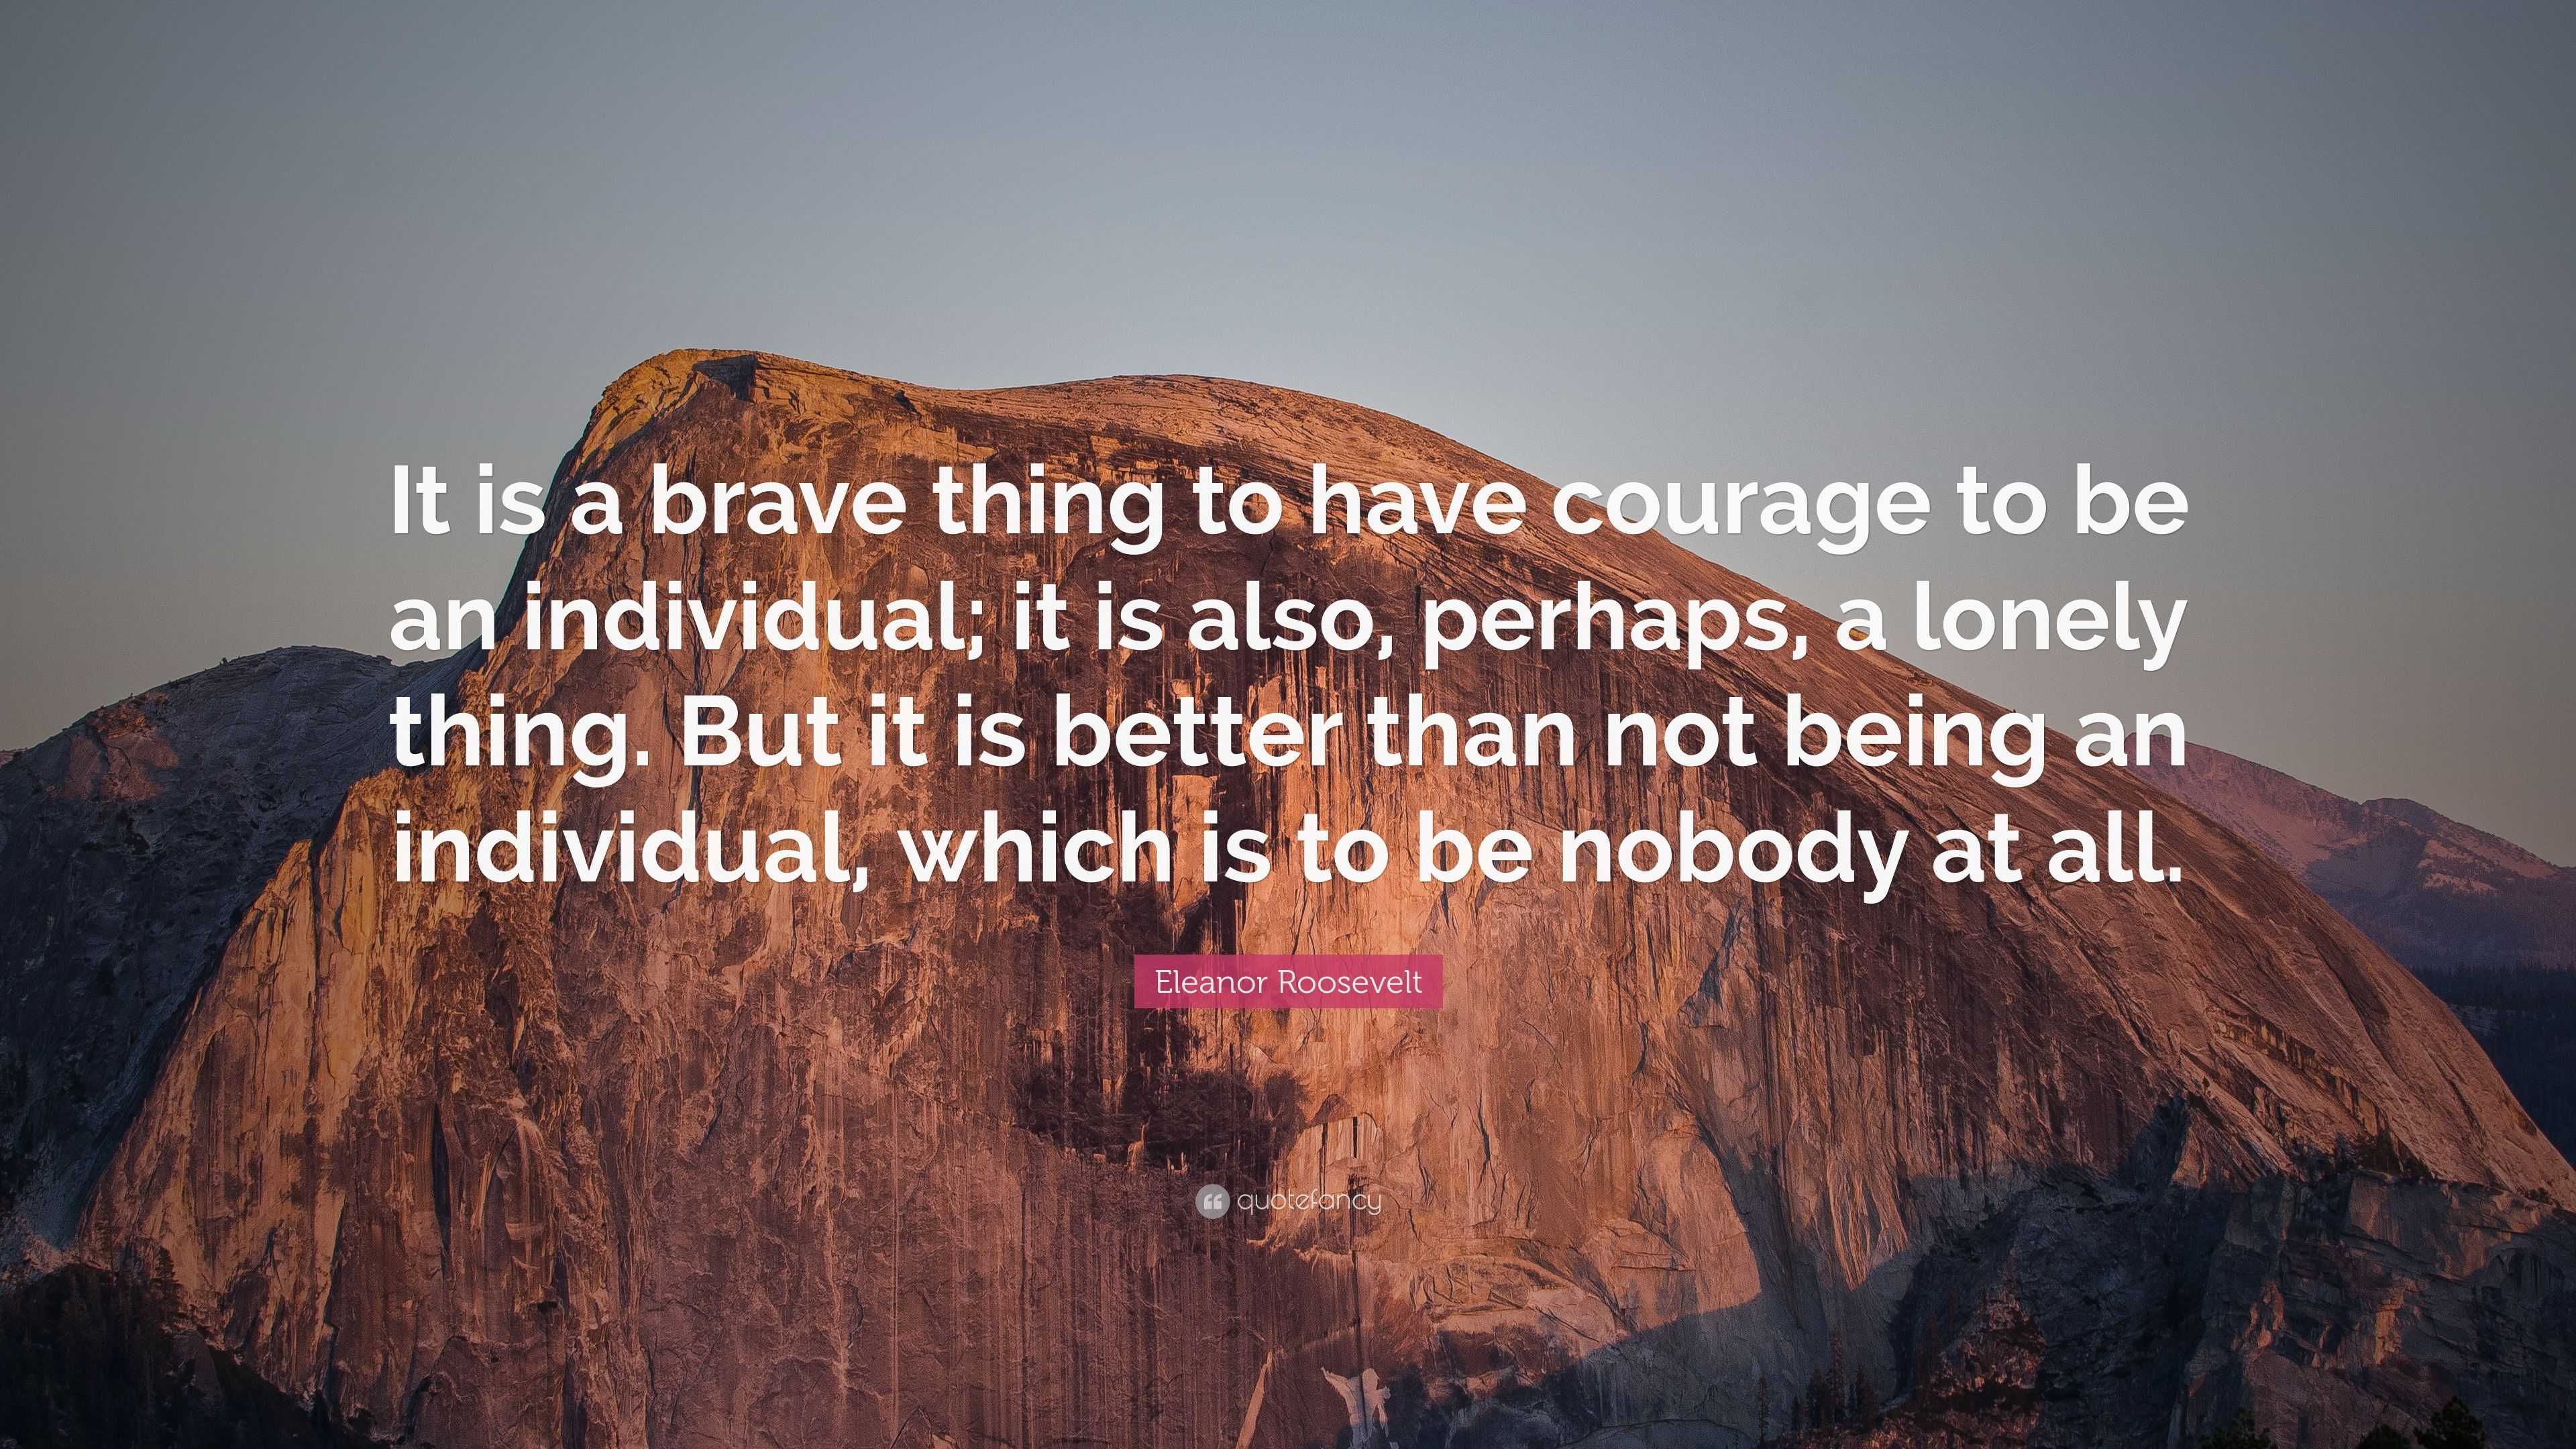 Eleanor Roosevelt Quote: “It is a brave thing to have courage to be an ...